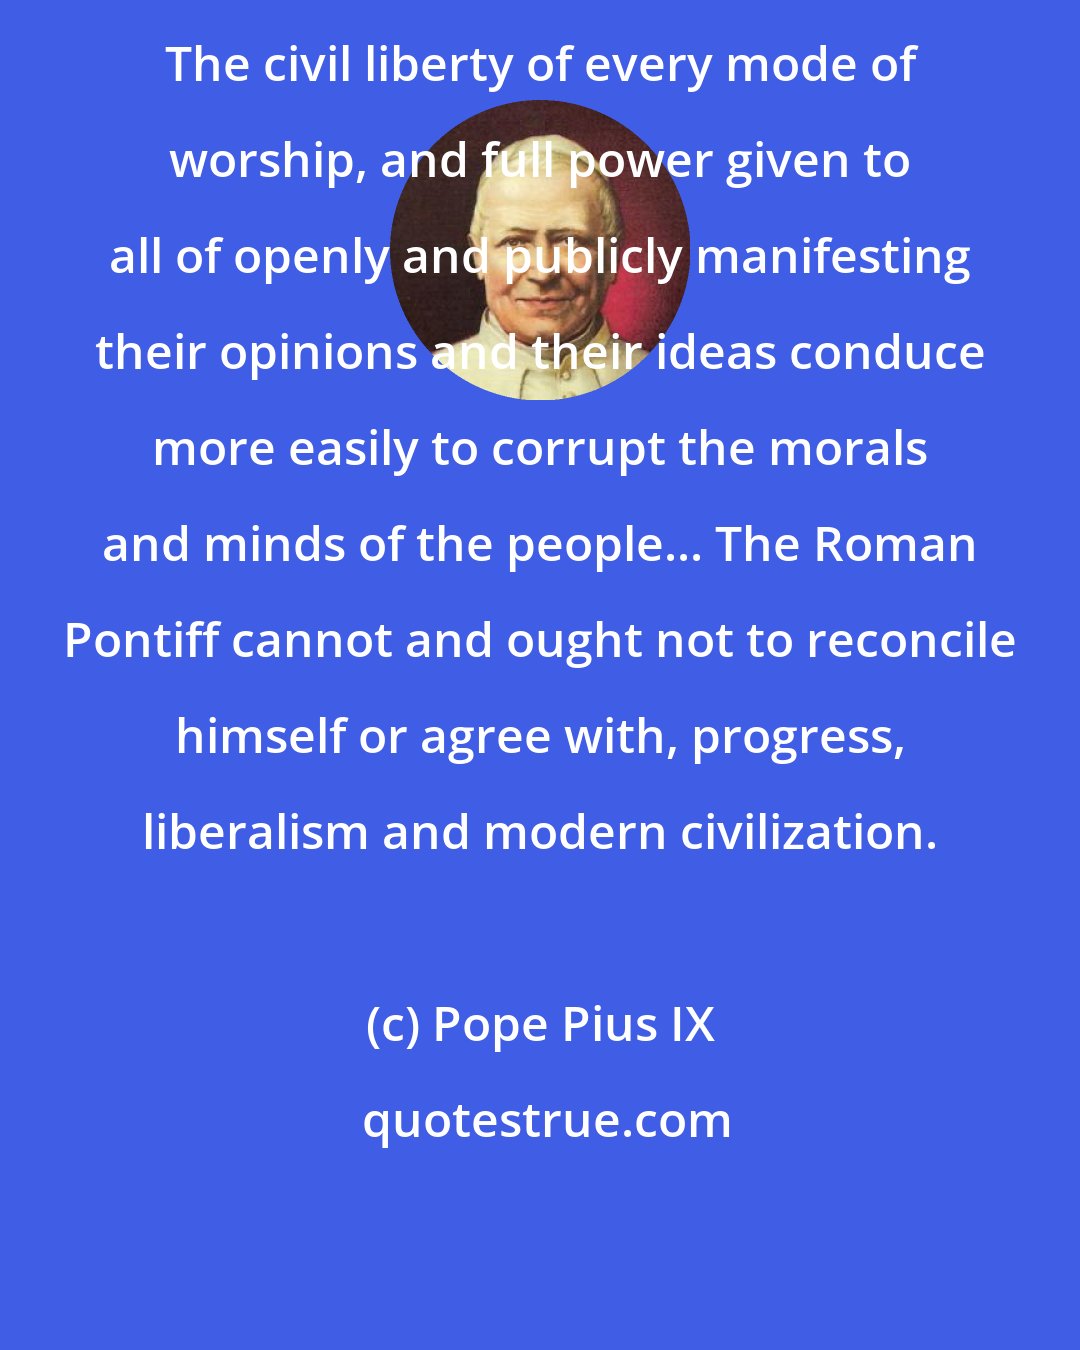 Pope Pius IX: The civil liberty of every mode of worship, and full power given to all of openly and publicly manifesting their opinions and their ideas conduce more easily to corrupt the morals and minds of the people... The Roman Pontiff cannot and ought not to reconcile himself or agree with, progress, liberalism and modern civilization.